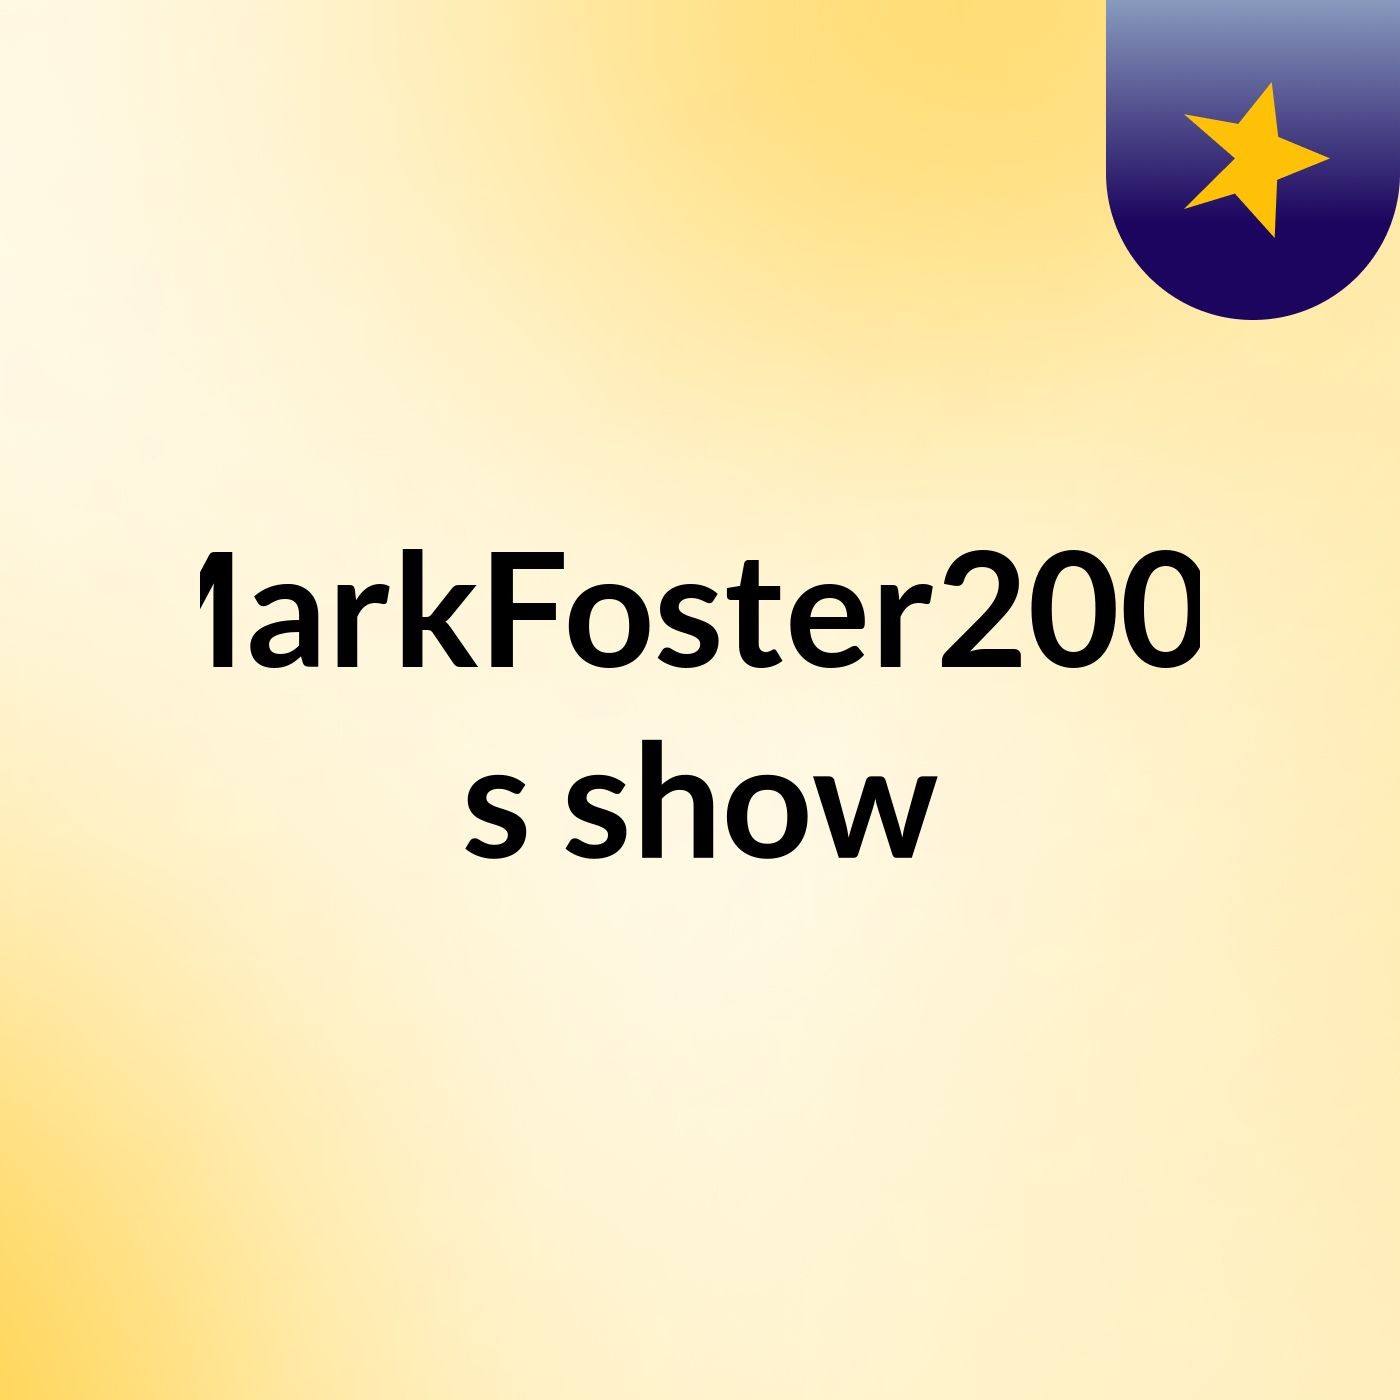 MarkFoster2004's show